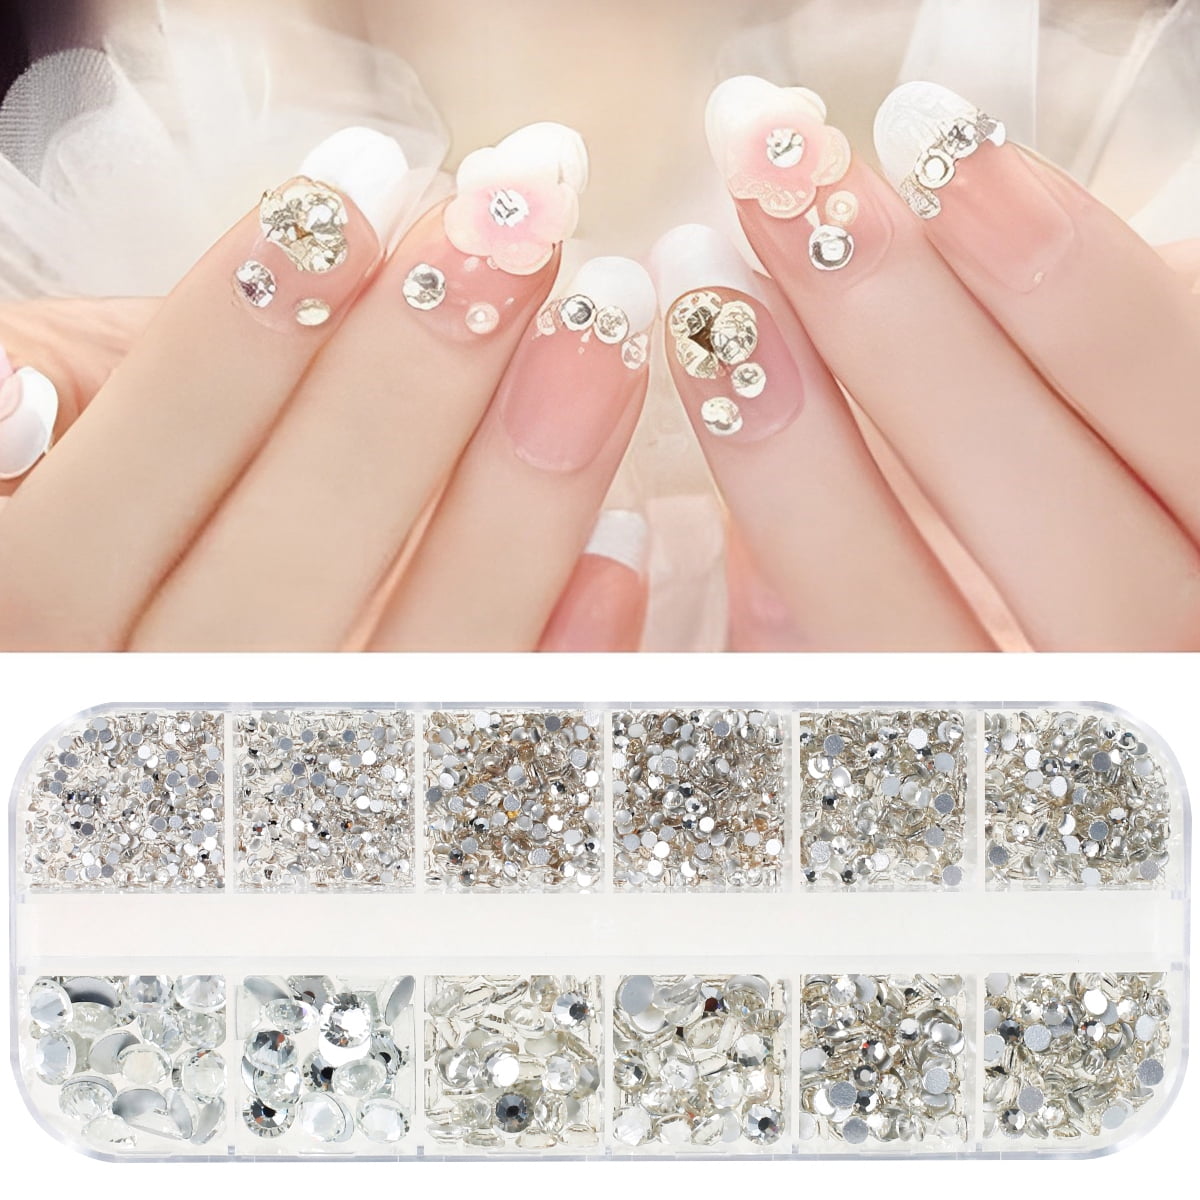 1728 Pieces AB Crystal Rhinestones Flatback Nail Gems for Nails Art Clothes  Shoes Phone Case and Crafts - Mixed SS4 5 6 8 10 12 in 2023